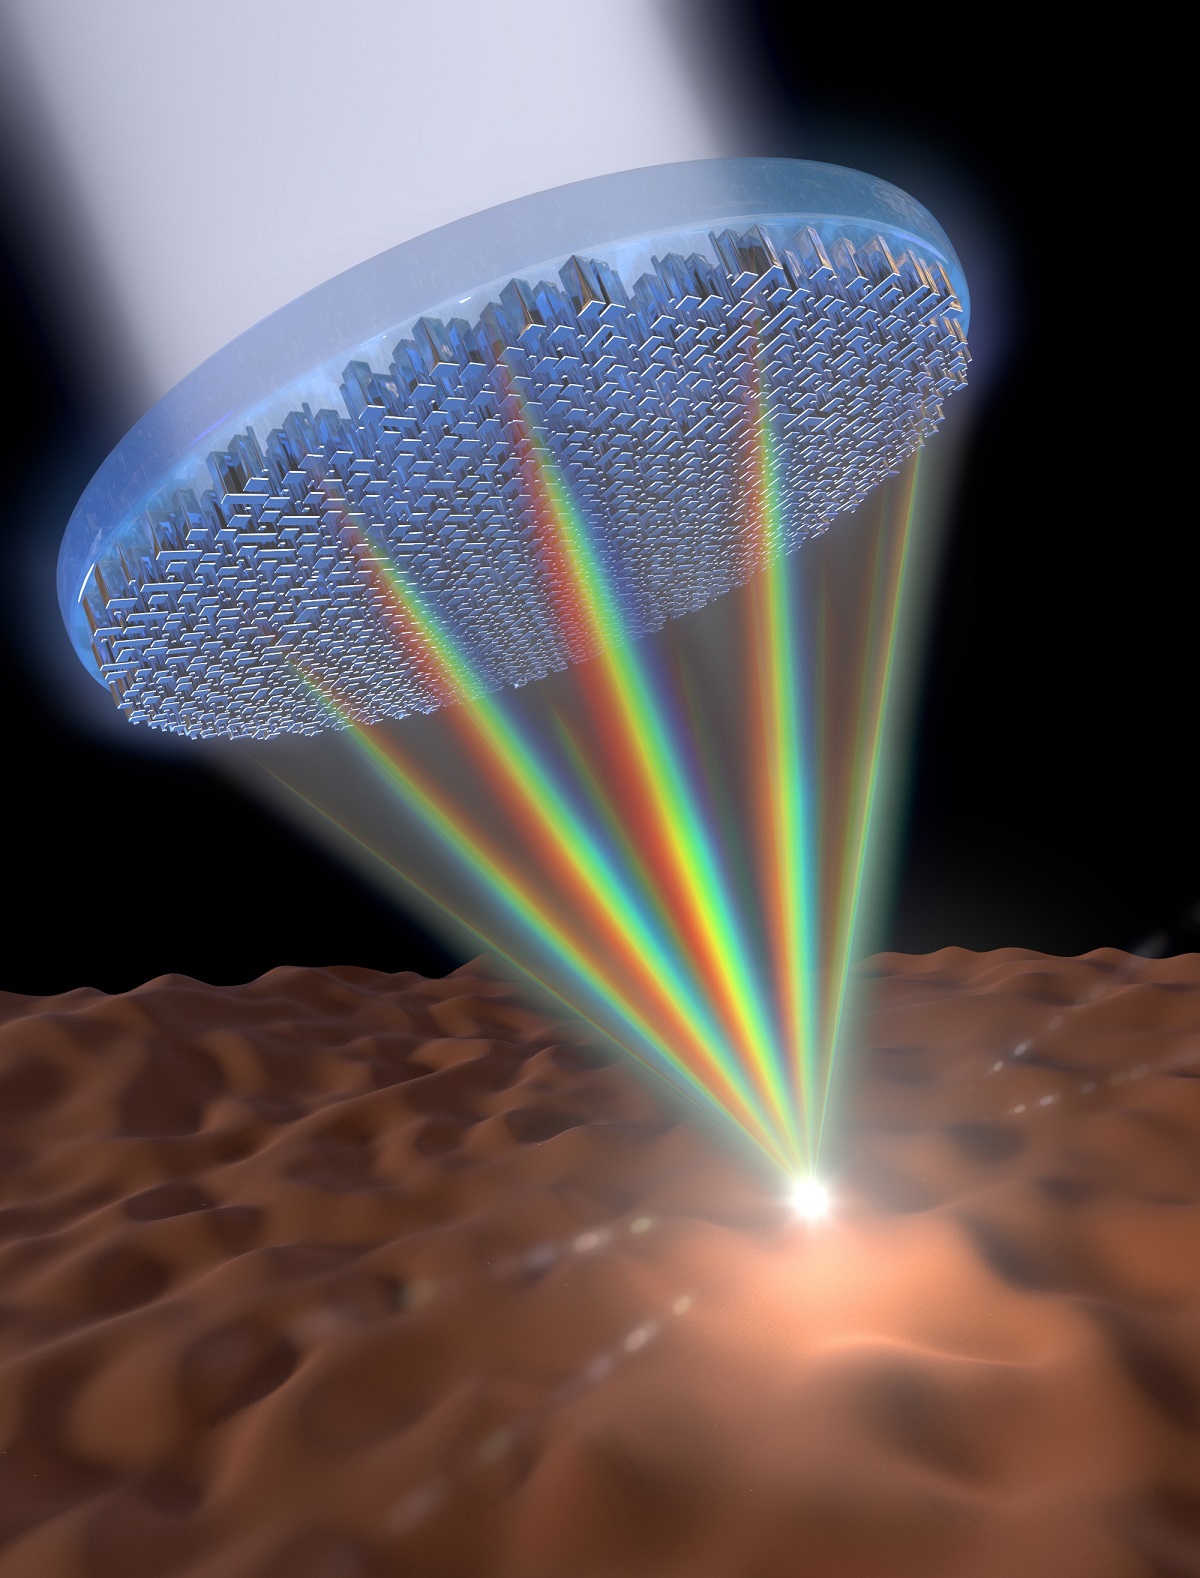 This flat metalens is the first single lens that can focus the entire visible spectrum of light — including white light — in the same spot and in high resolution